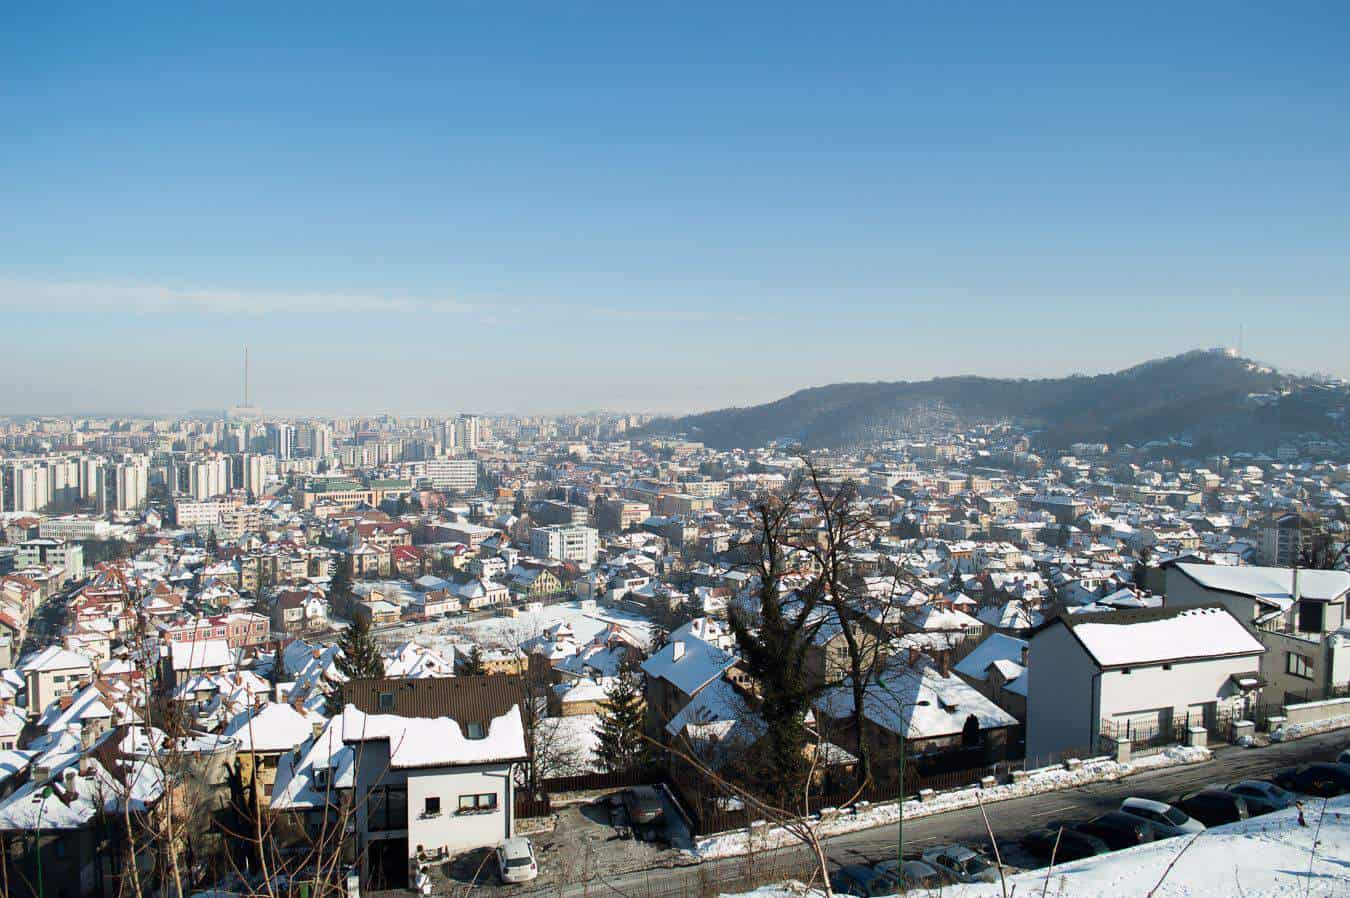 View of a city dusted by snow under a blue sky.